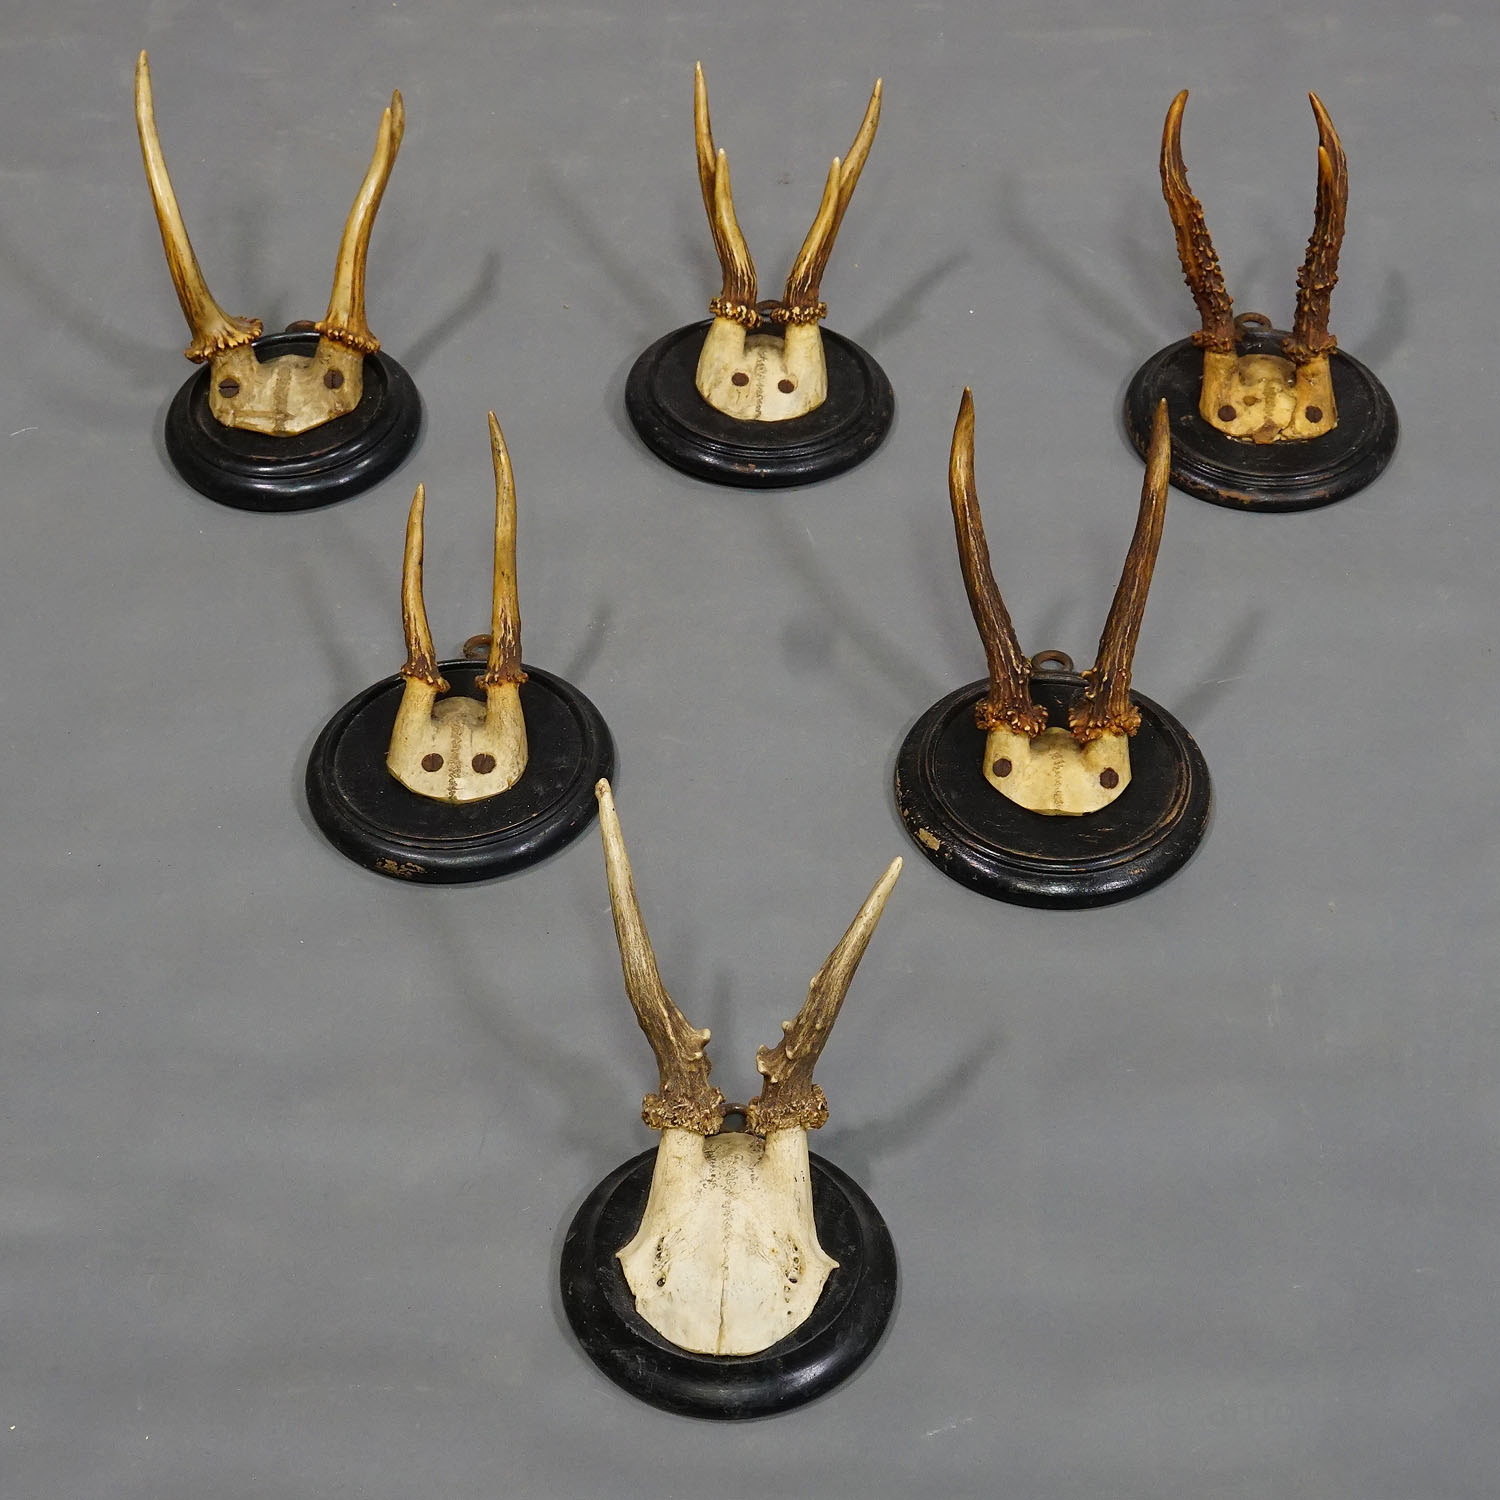 Six Antique Deer Trophies on Wooden Plaques Germany ca. 1900s